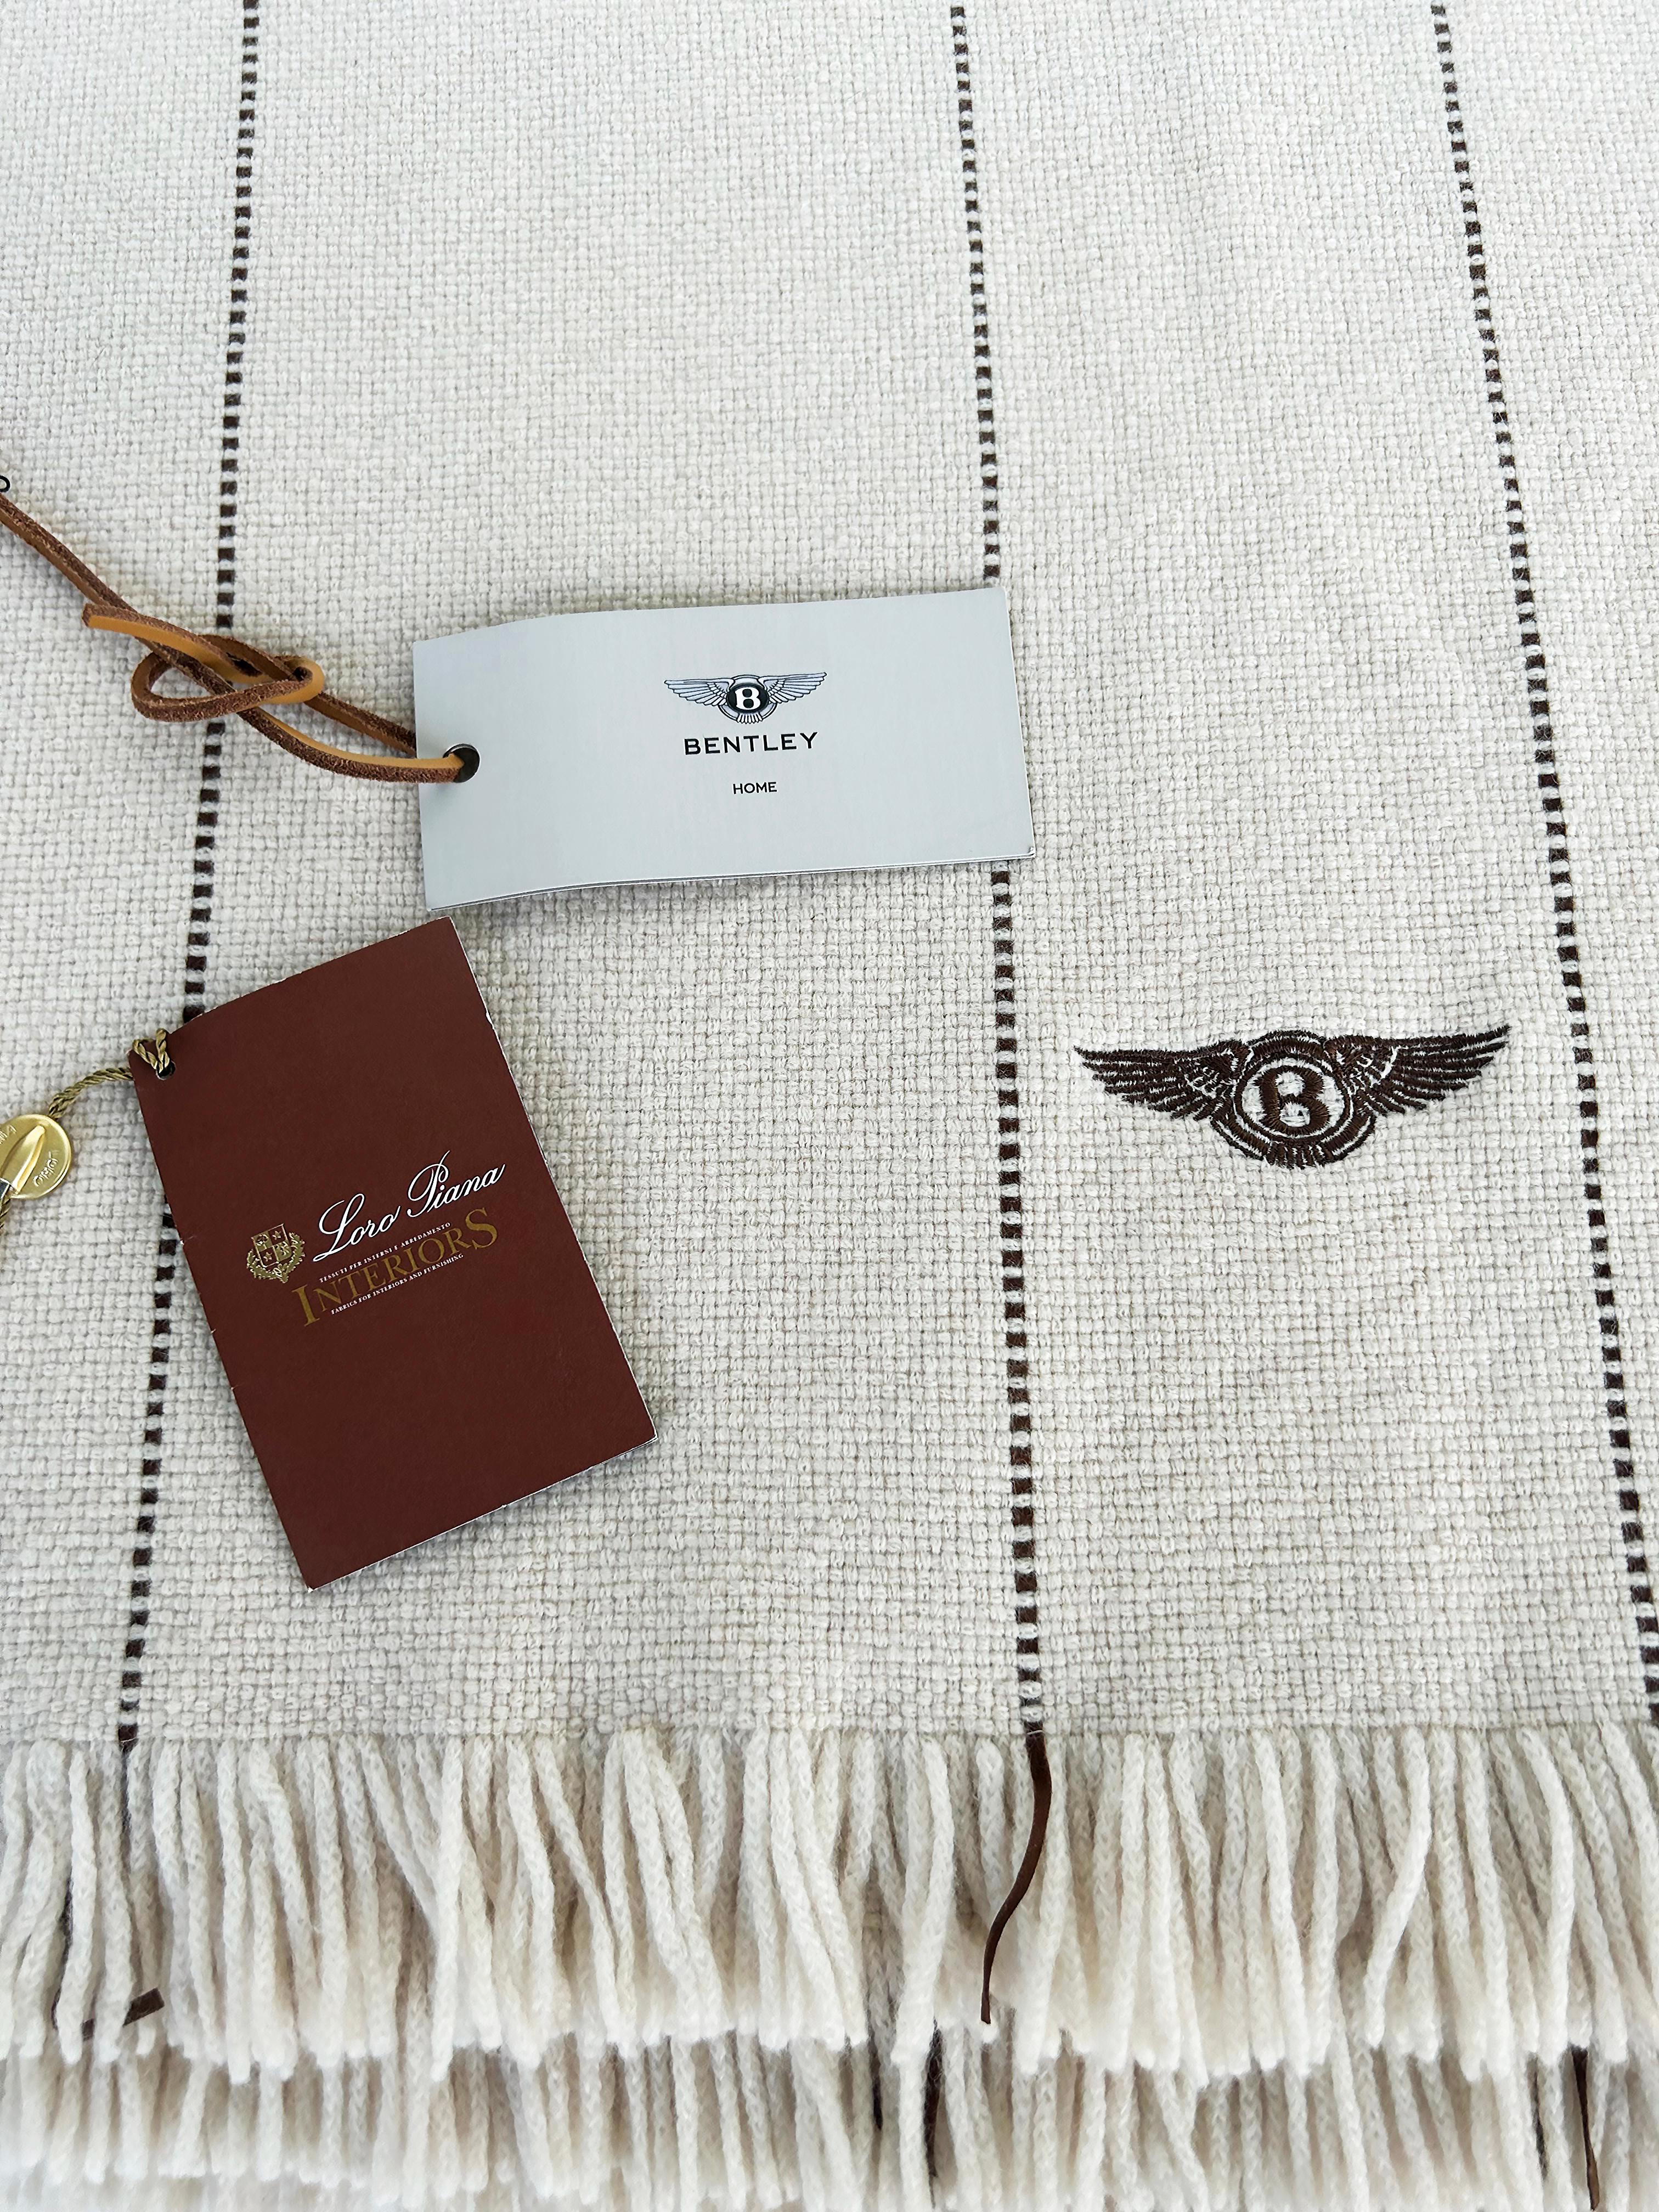 Contemporary Bentley Home England Loro Piana Italy Cashmere Throw with Fringe For Sale